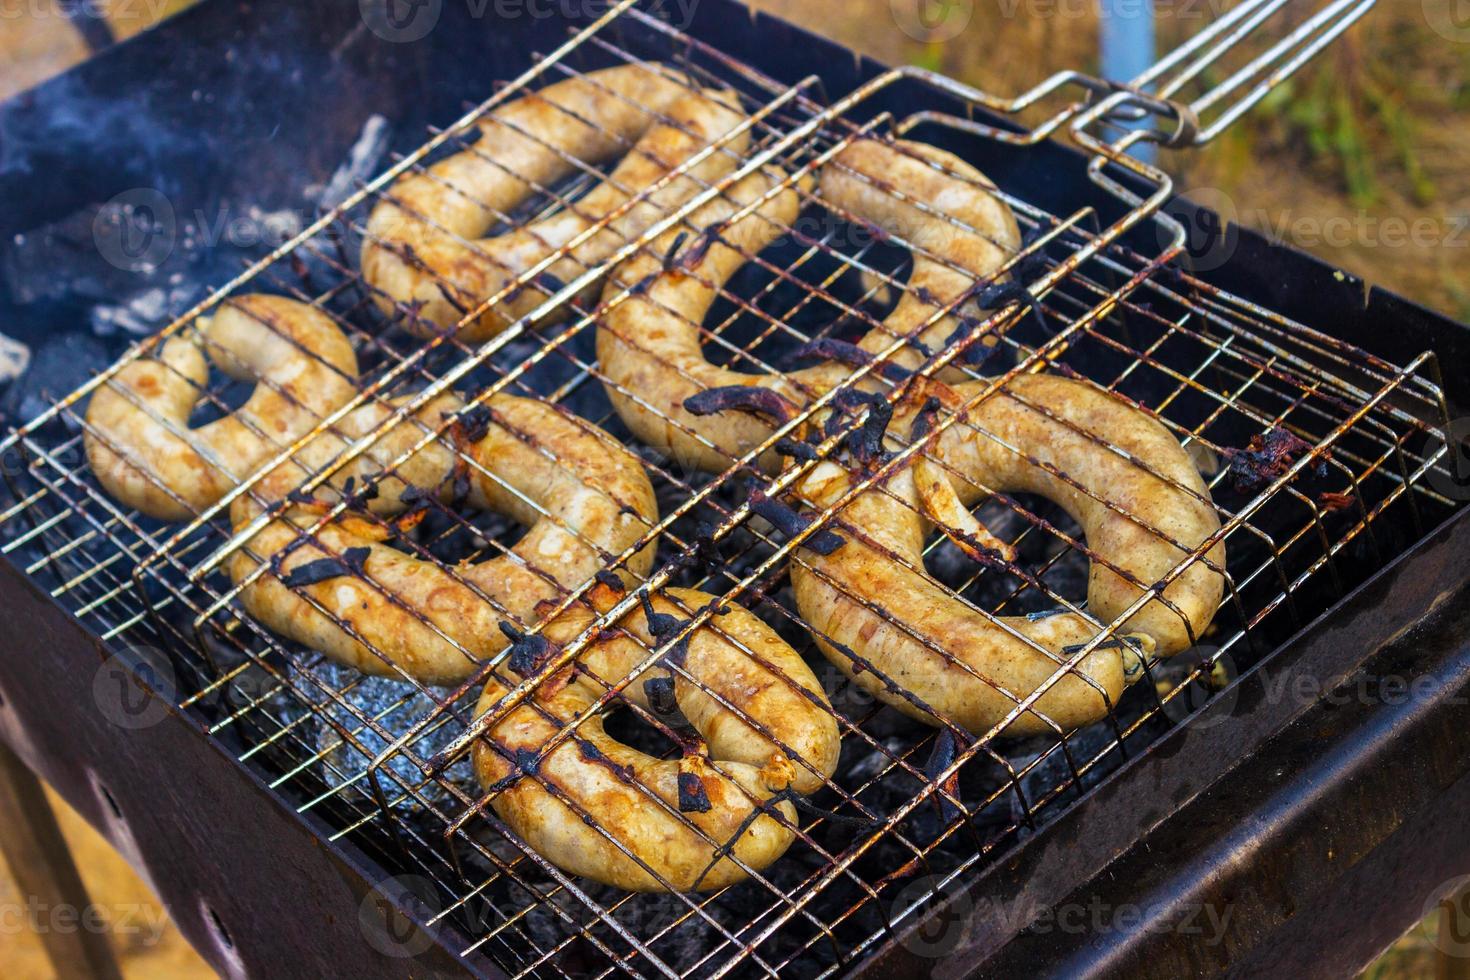 Pork sausages grilling on a portable BBQ with one sausage being turned in a pair of tongs on a summer picnic, close up of the grill, meat and fire photo